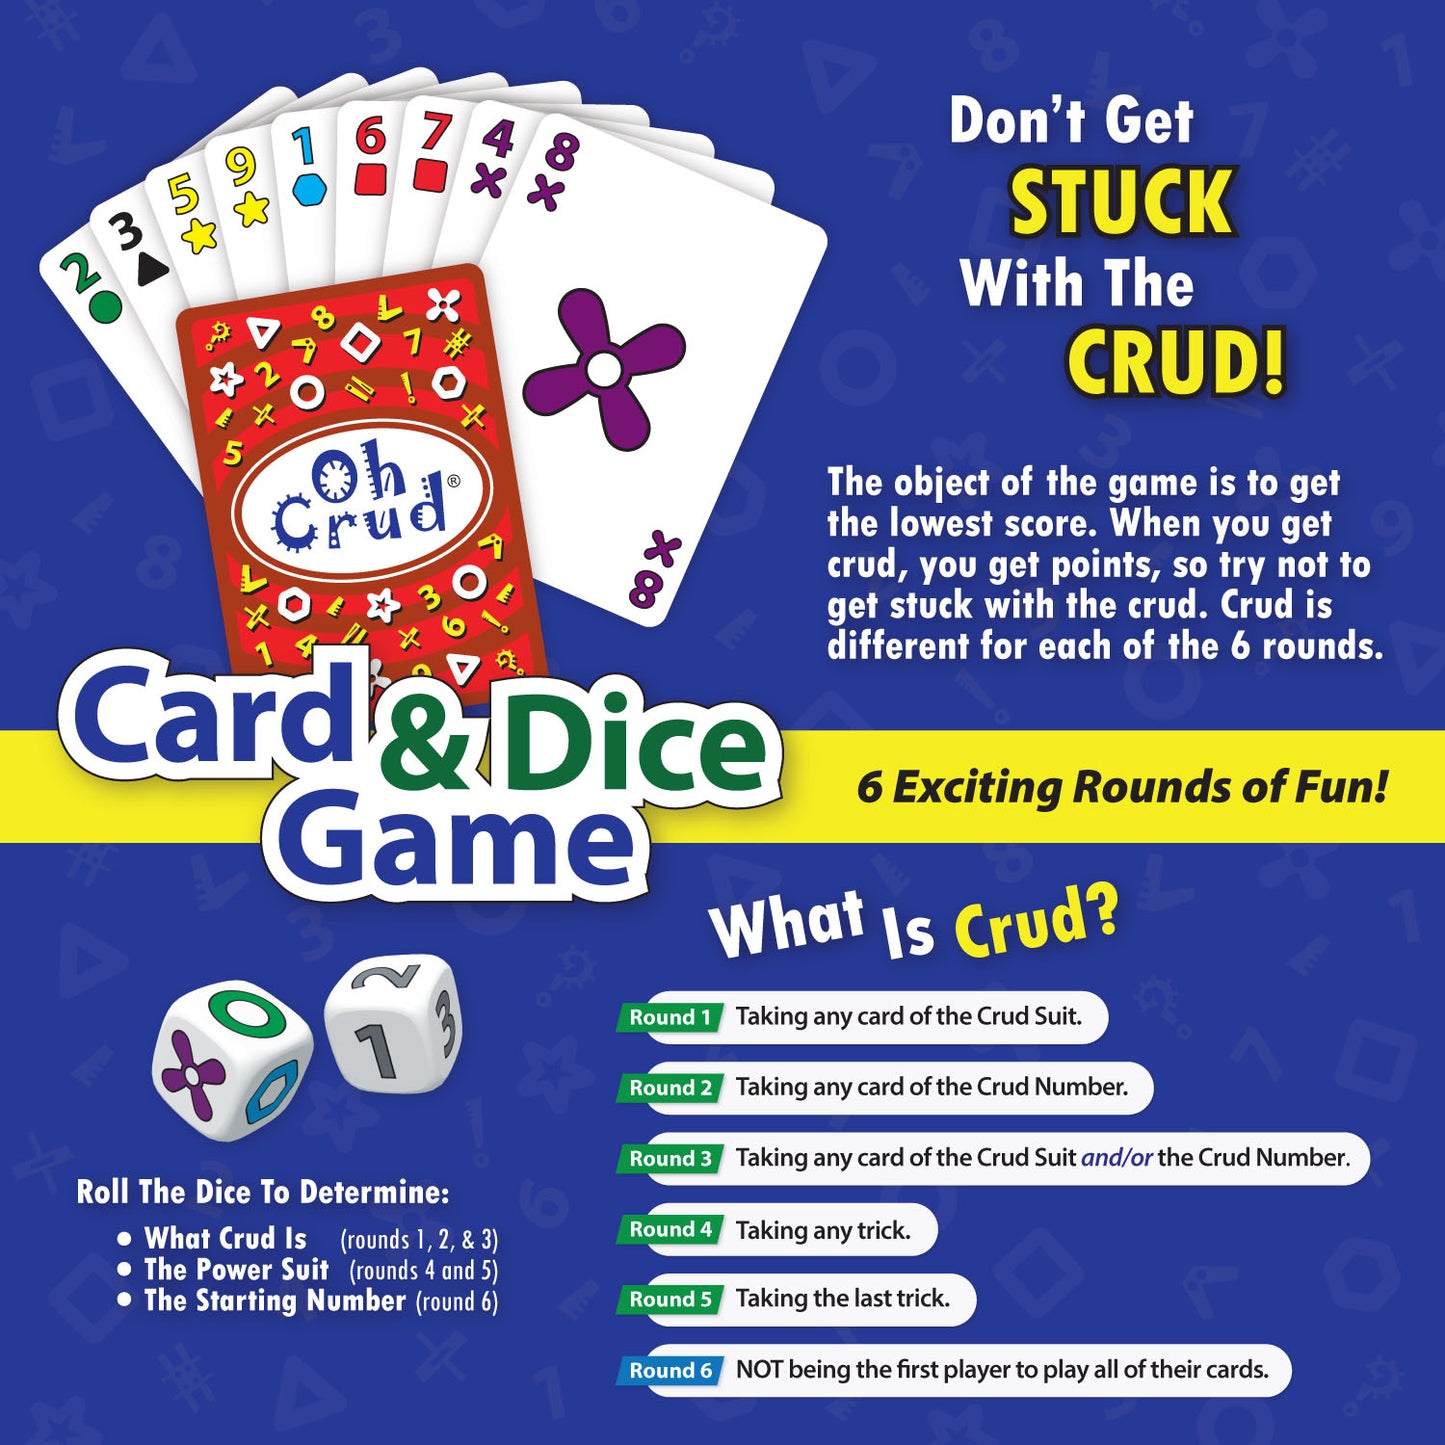 Oh Crud Card and Dice Game